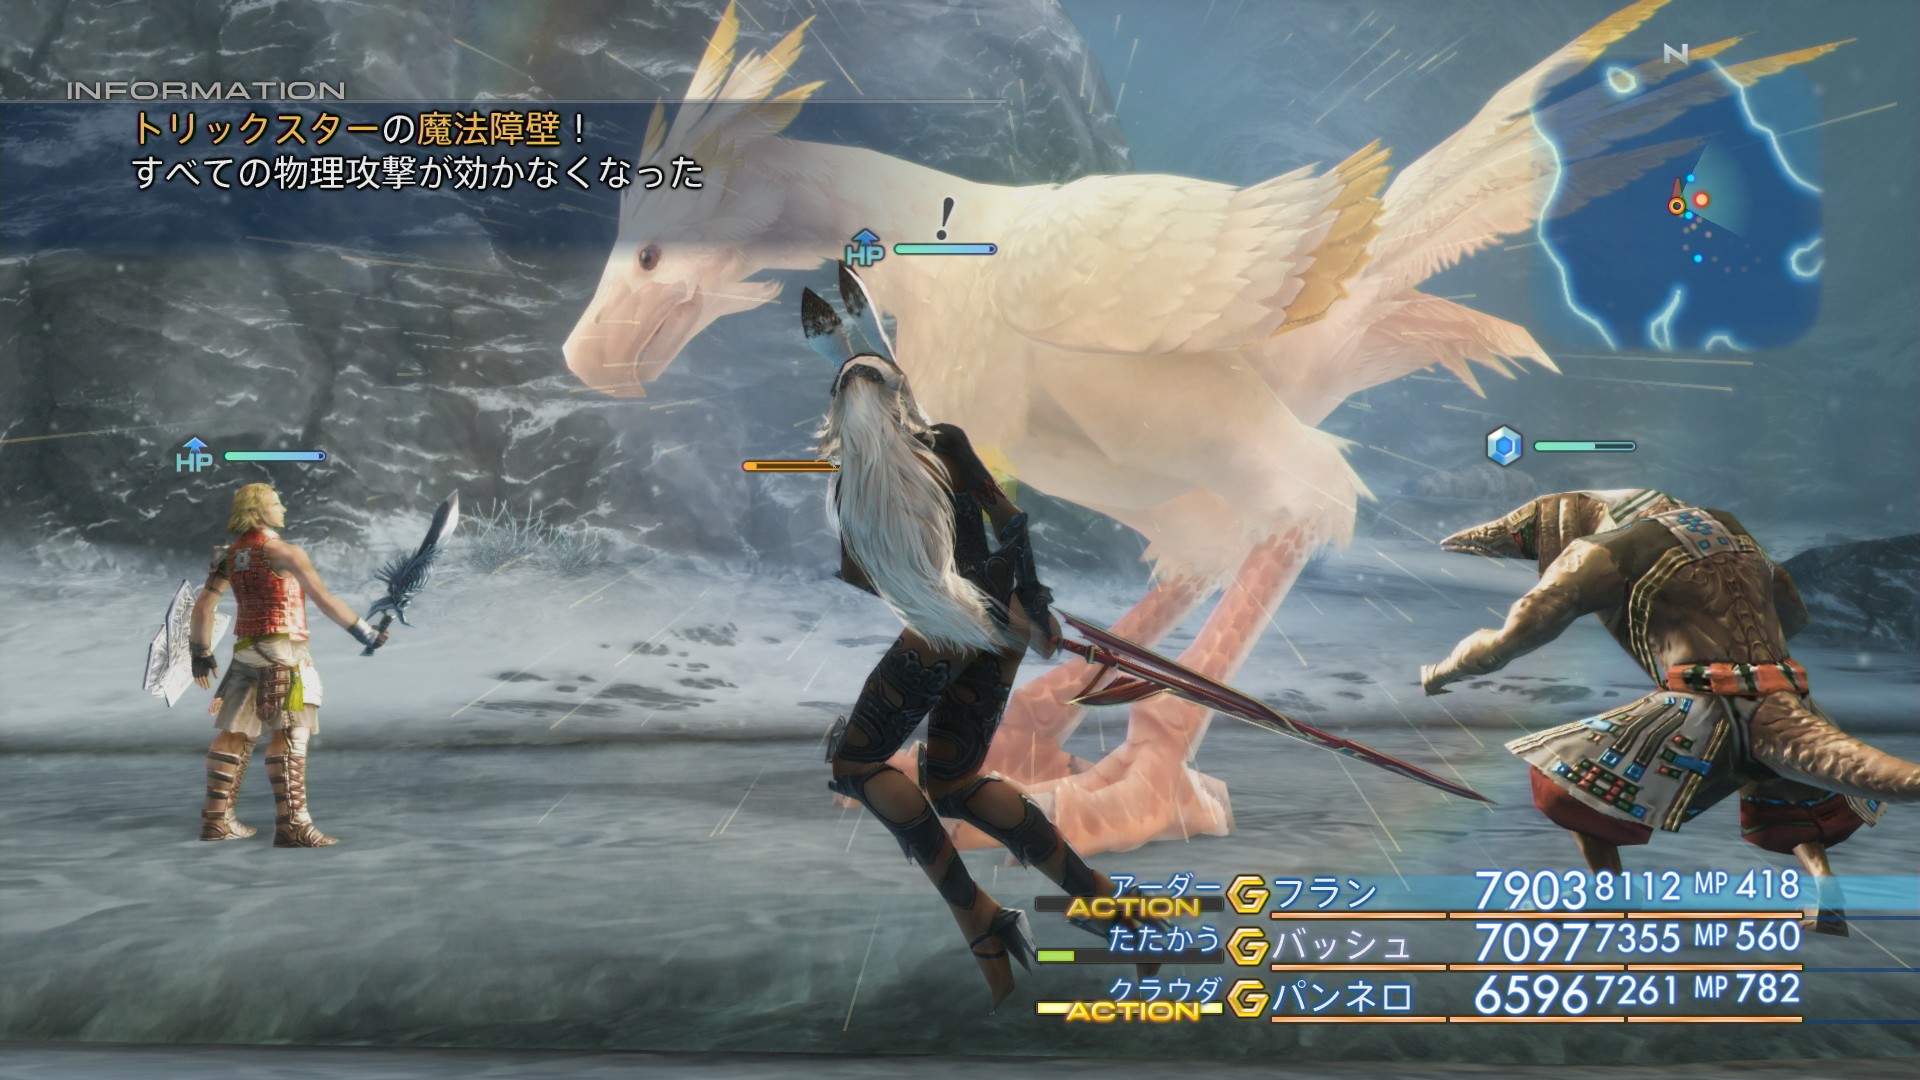 Image of Final Fantasy XII featuring the party fighting a shining chocobo